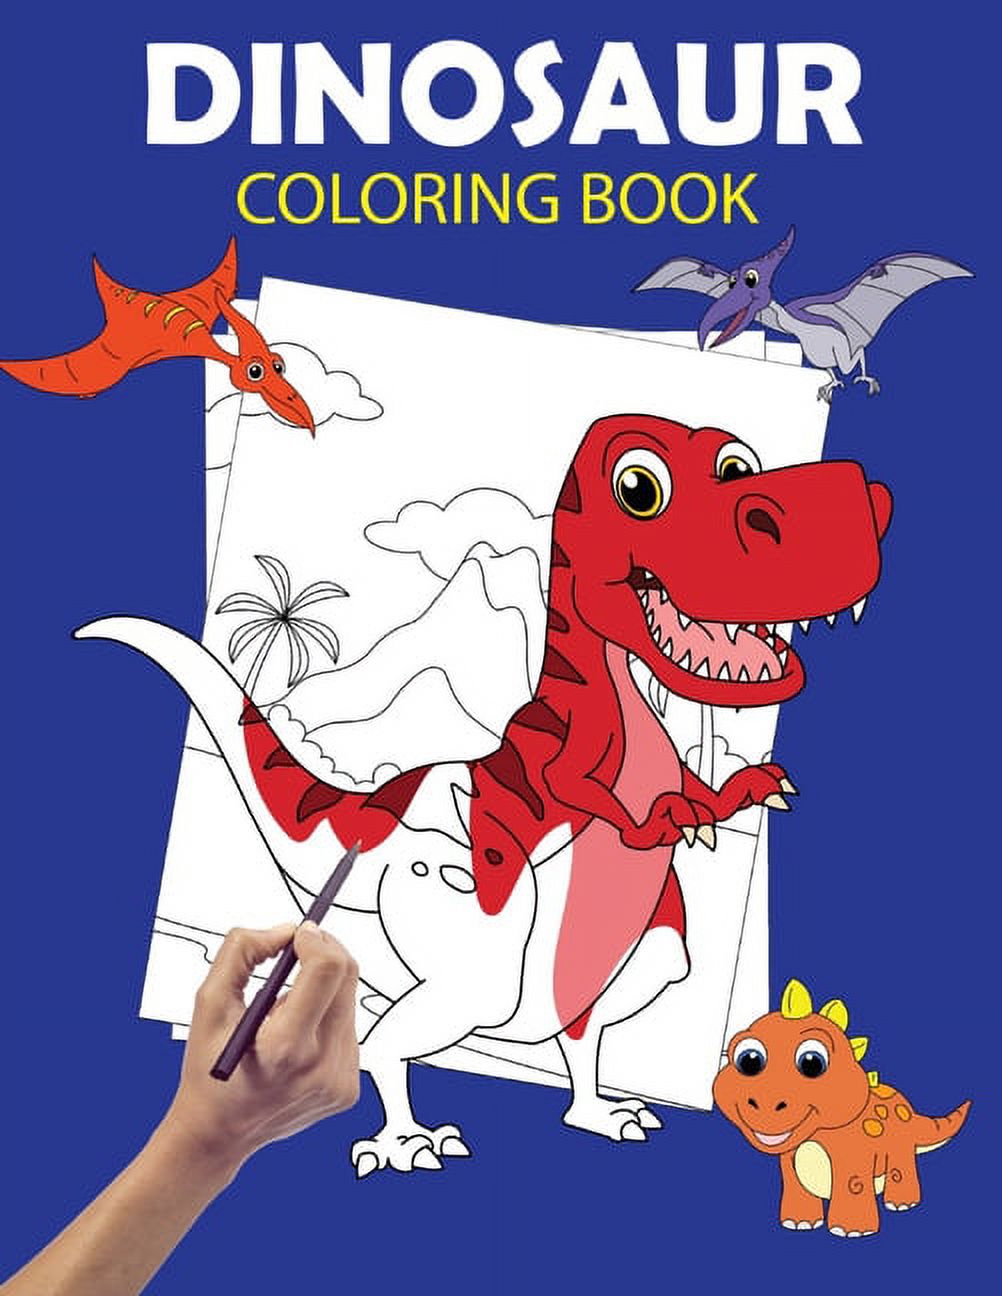 Dinosaur Coloring Book: Large Dinosaur Coloring Books for Kids Ages 4-8 - Dino Colouring Book for Children with 60 Pages to Color - Great Gift for Dinosaurs Lovers Boys and Girls [Book]